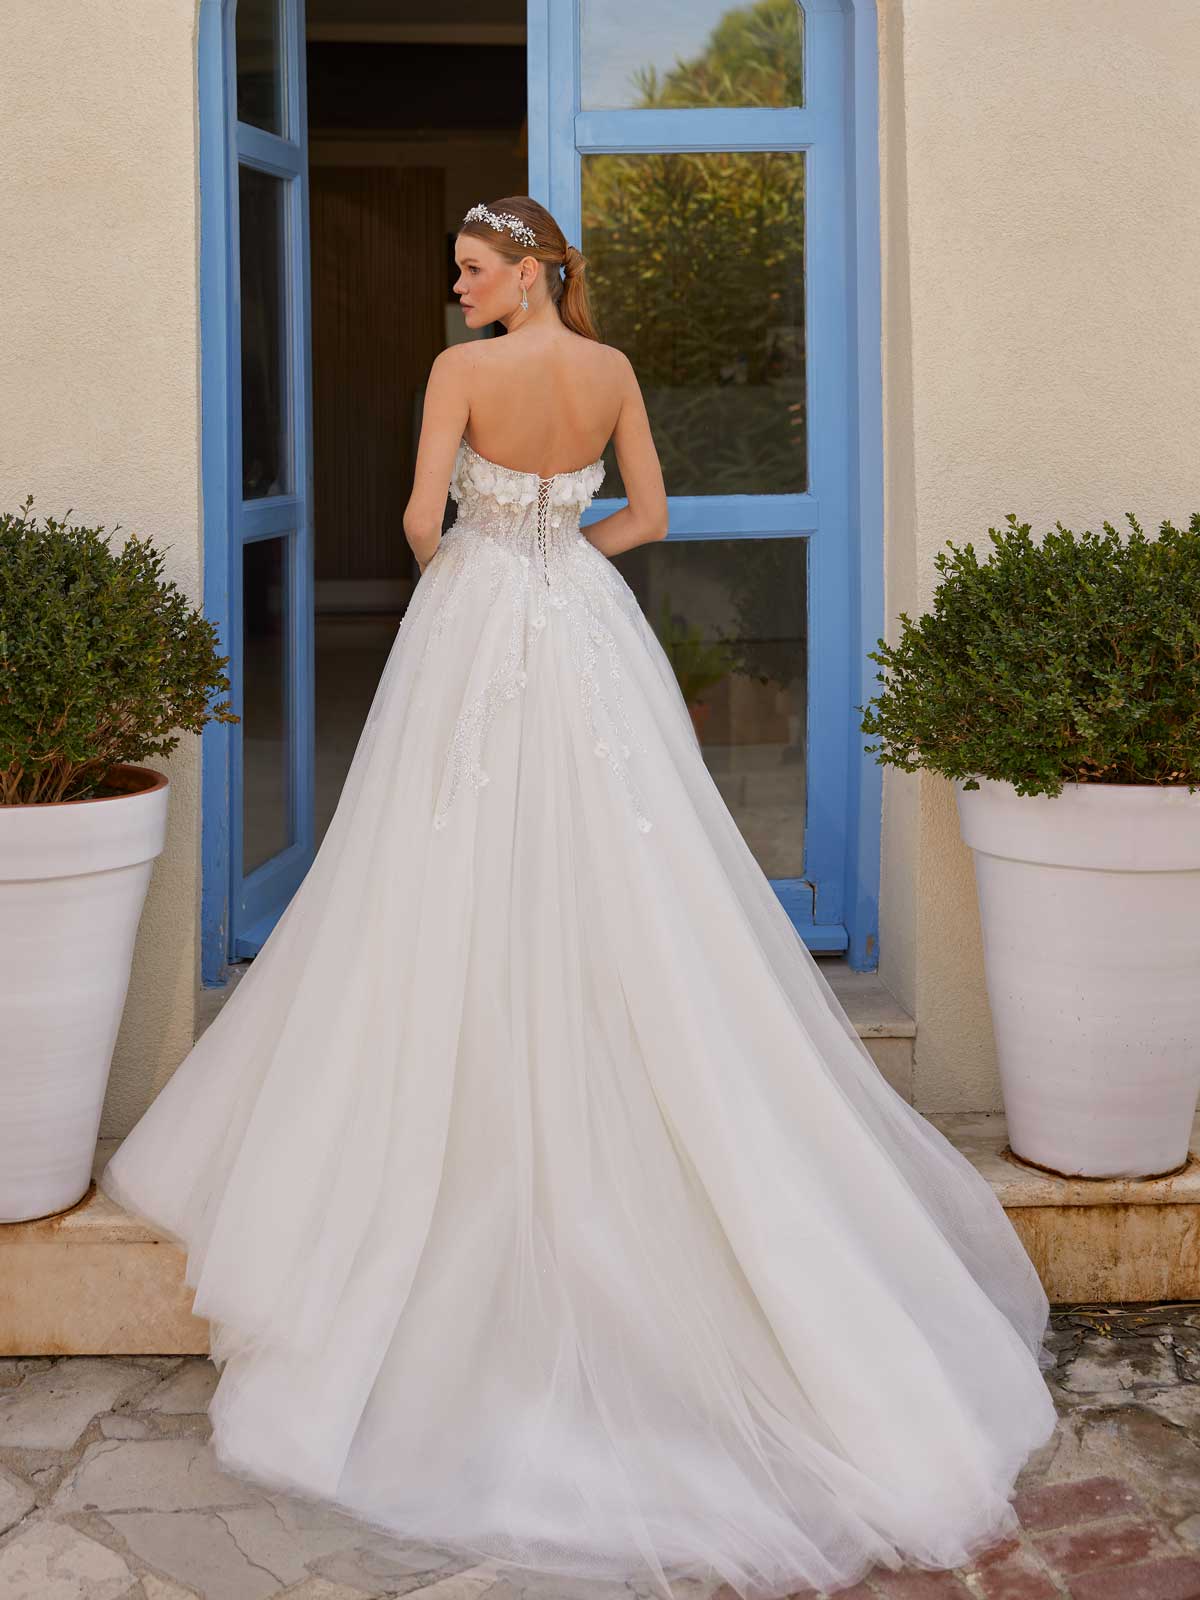 How to Buy a Cheap and Legit Wedding Dress Online Without Getting Scammed -  Destination Wedding Details